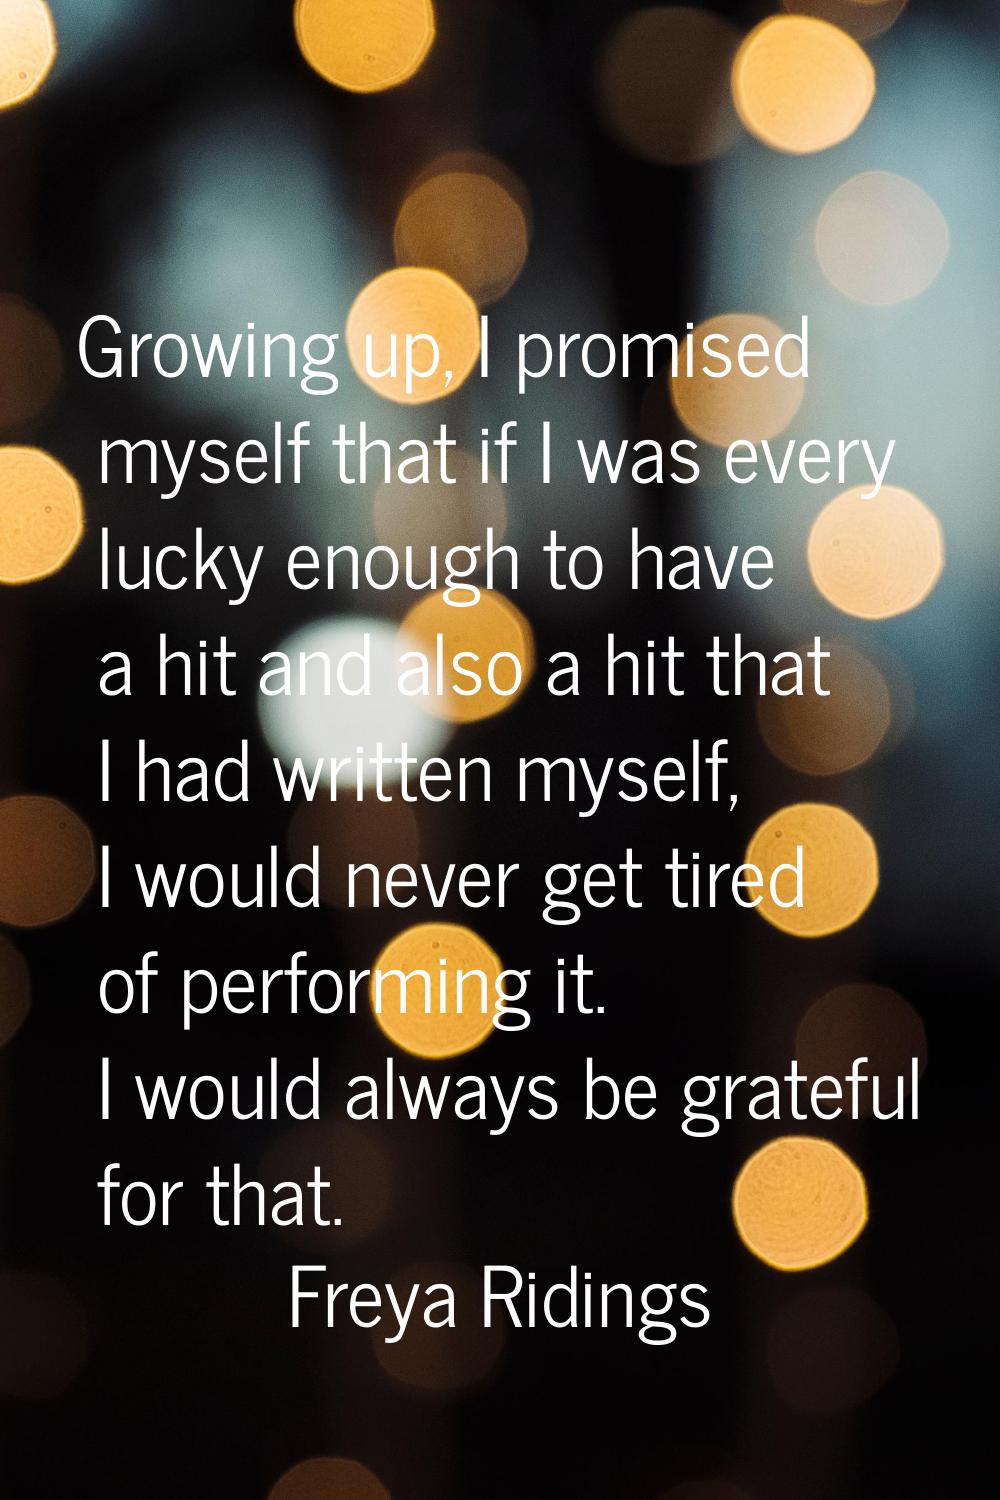 Growing up, I promised myself that if I was every lucky enough to have a hit and also a hit that I 